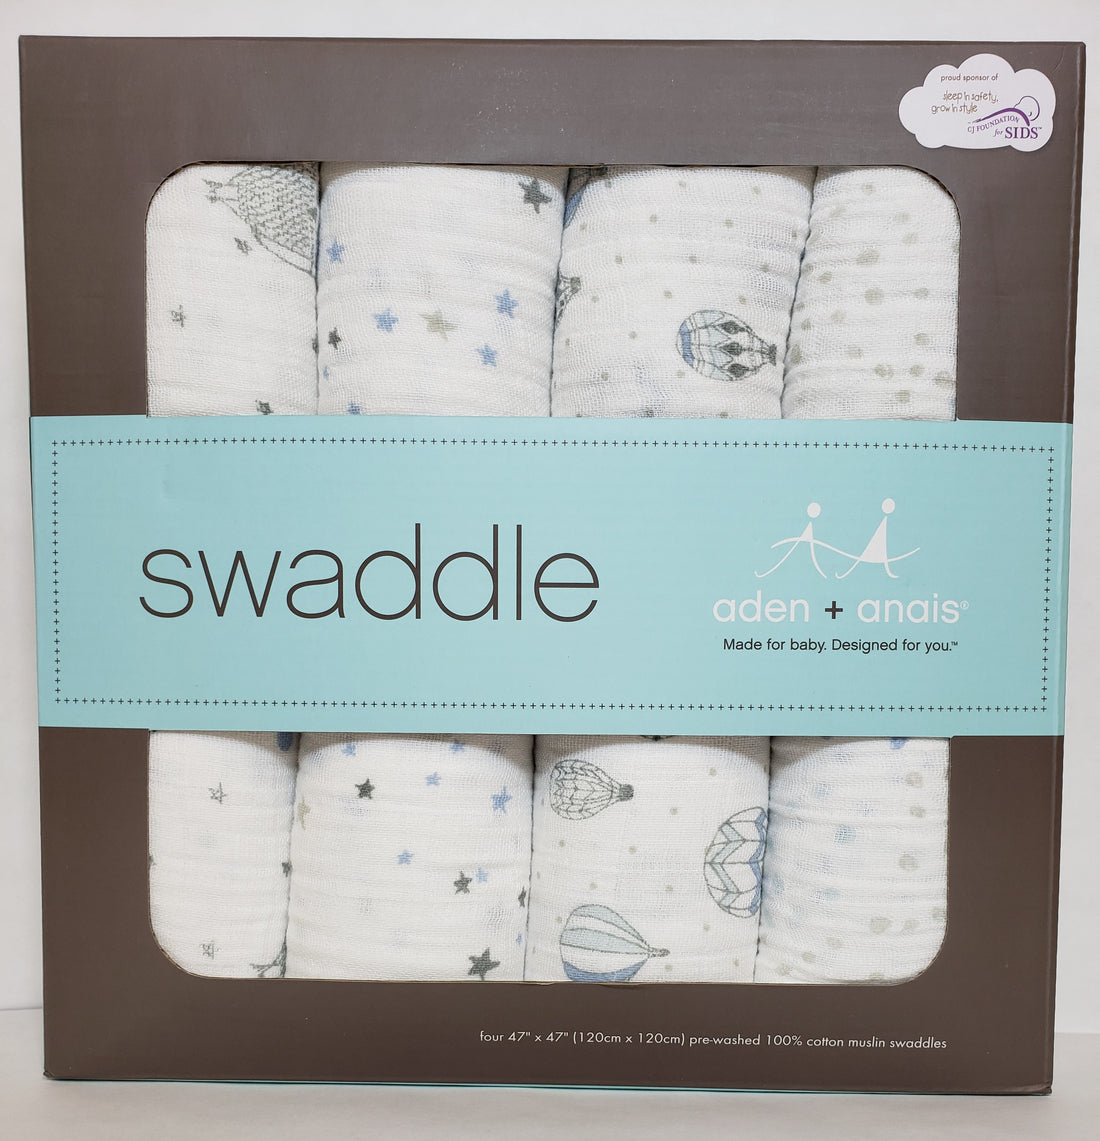 Aden + Anais Classic Cotton Swaddling Blankets, Night sky